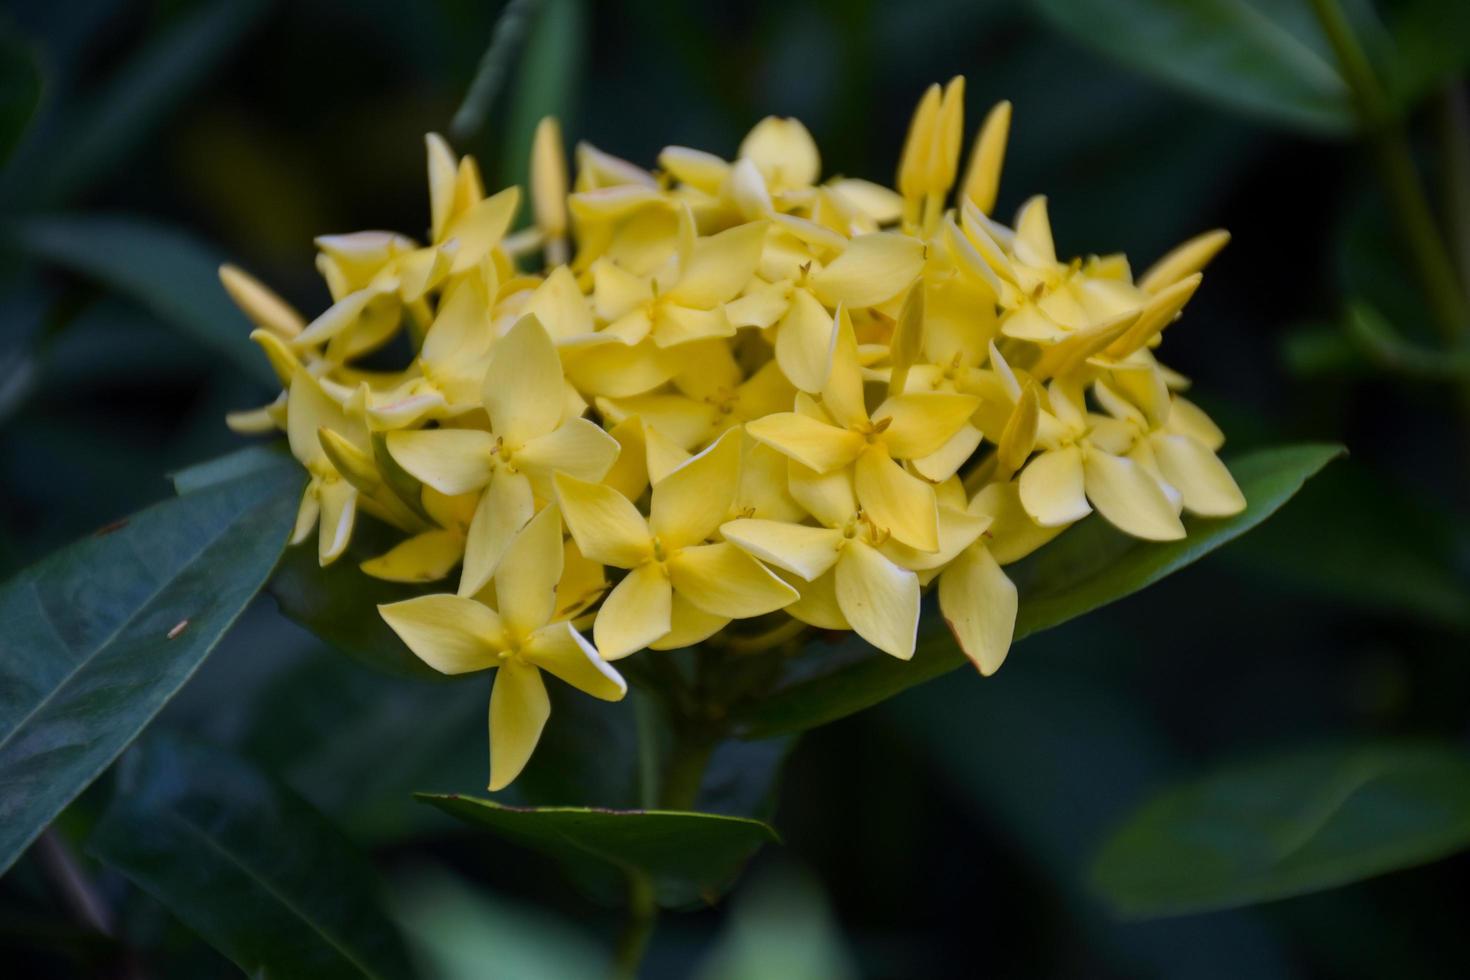 needle flowers yellow blooming beautiful petals in the Thai garden. photo